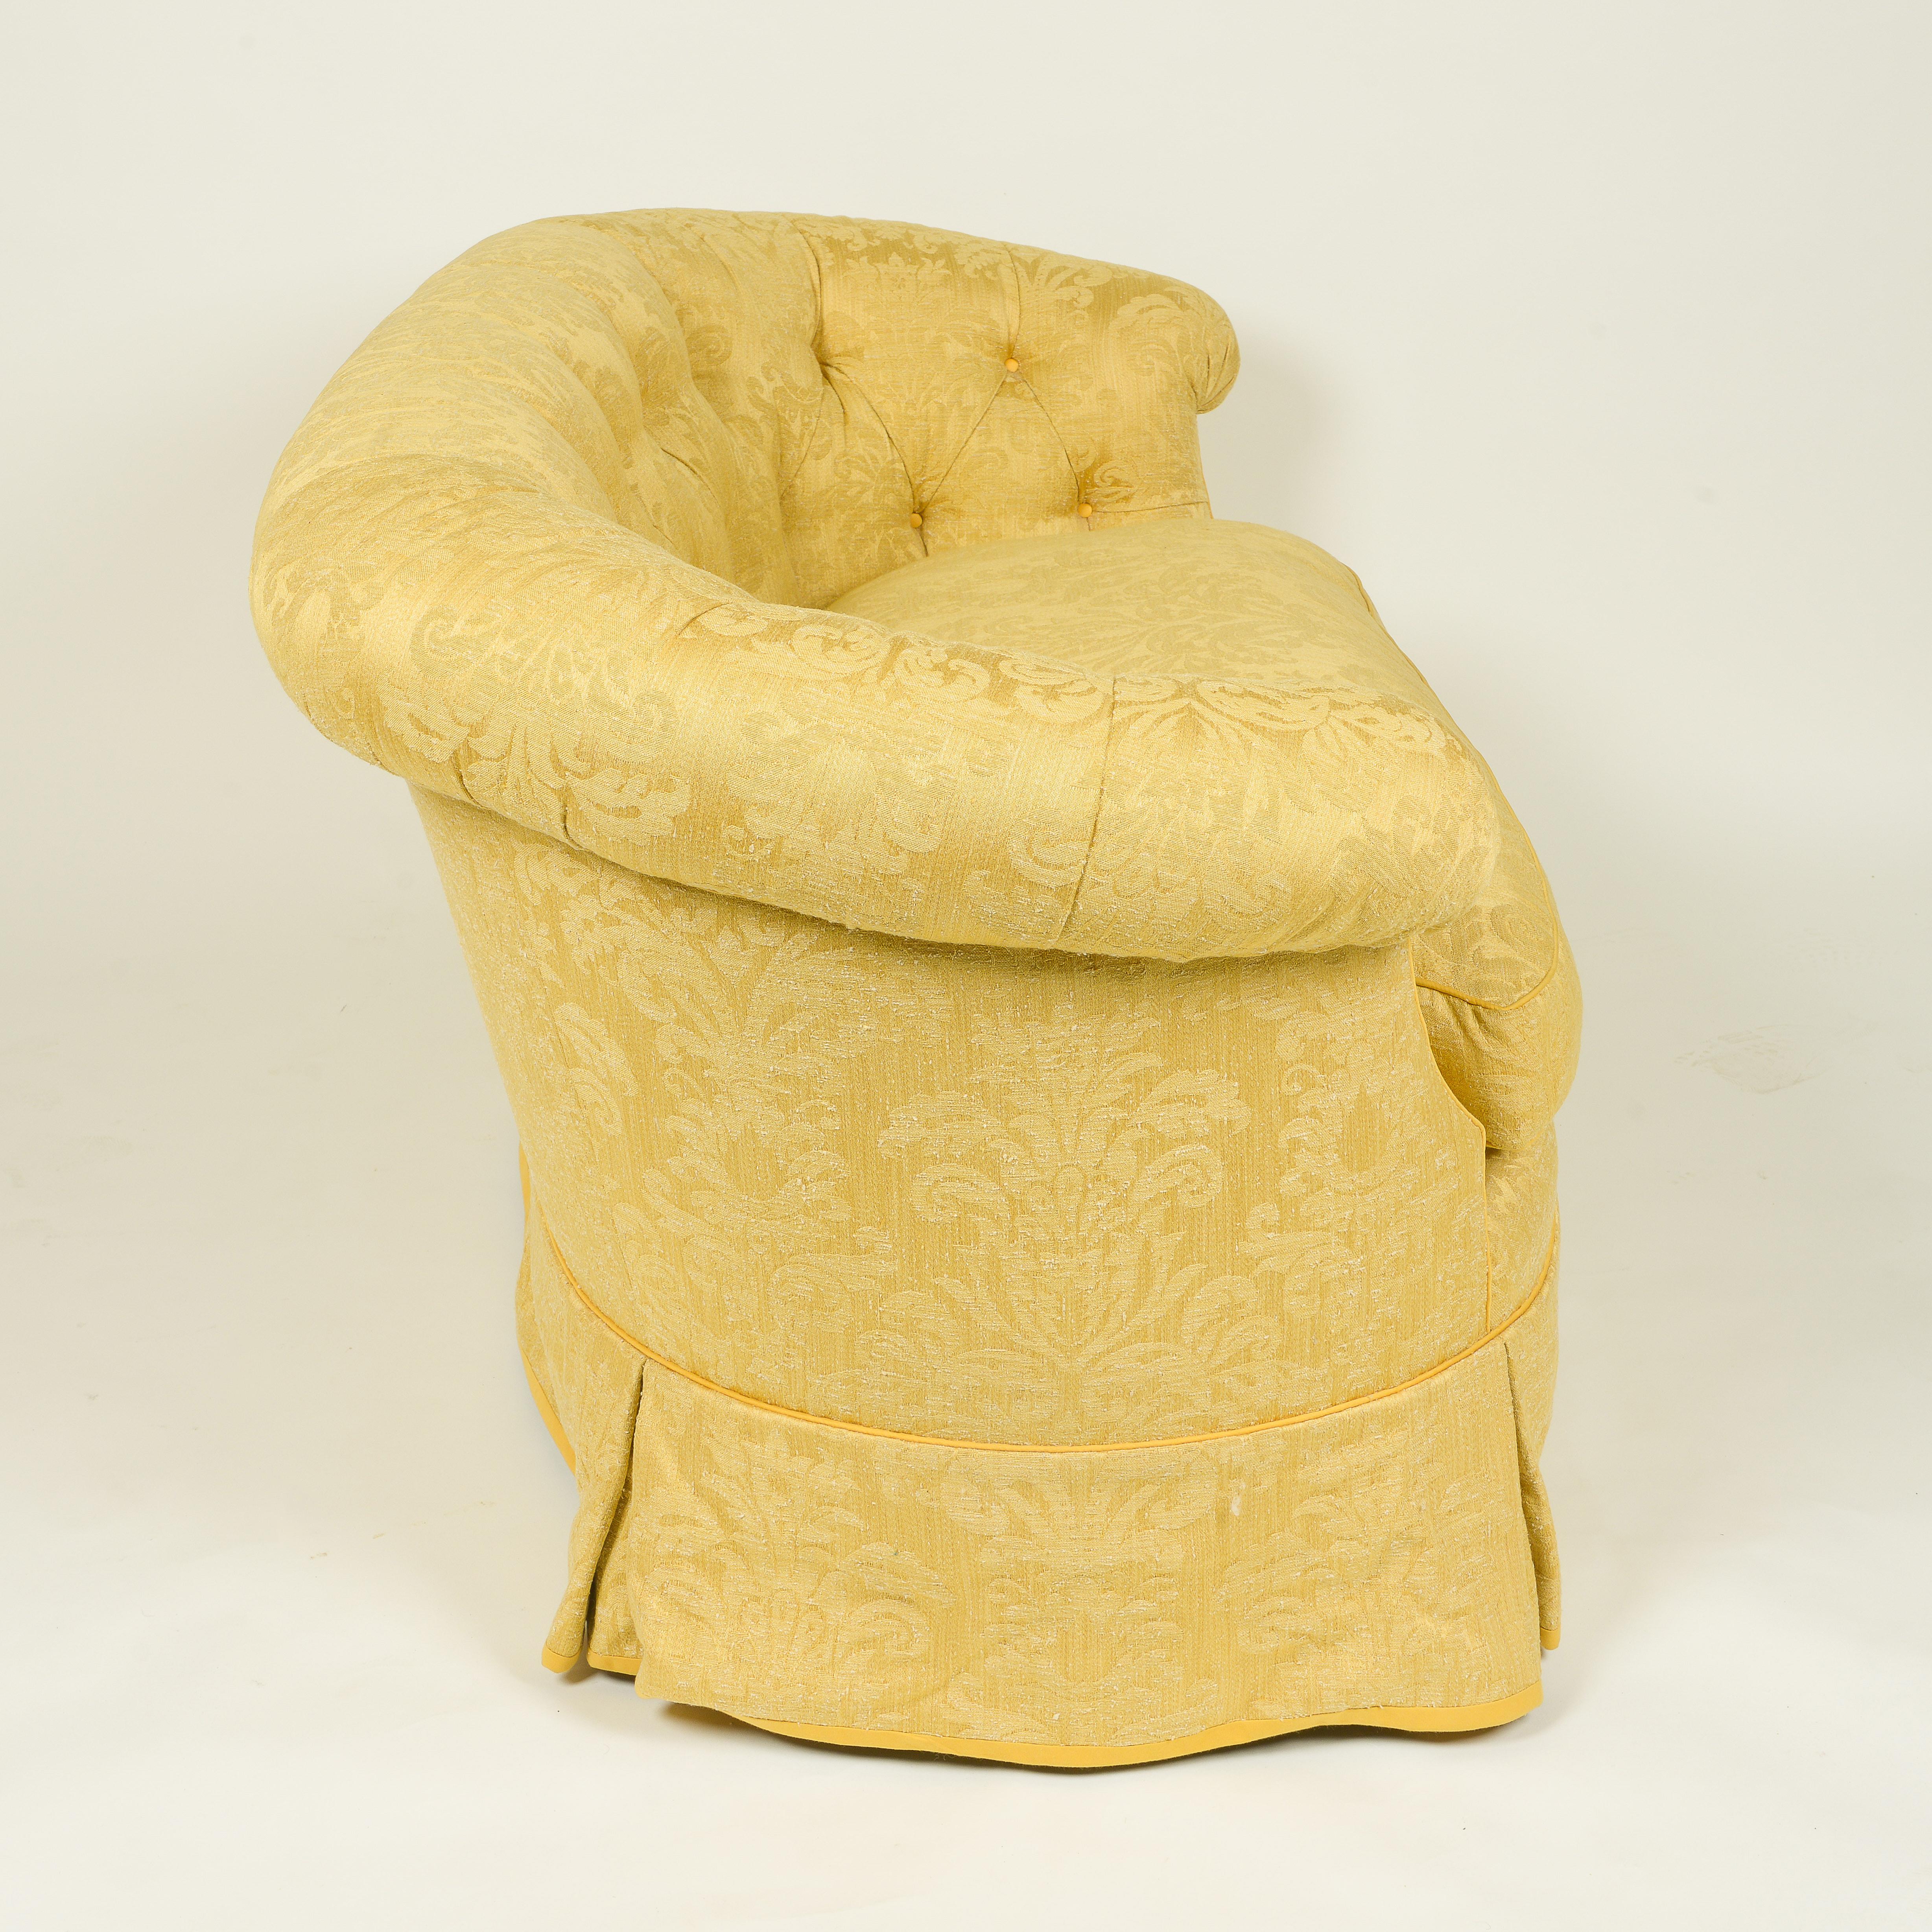 With rounded tufted back and loose down seat cushion. Custom made for Albert Hadley. Color is a deep golden yellow.